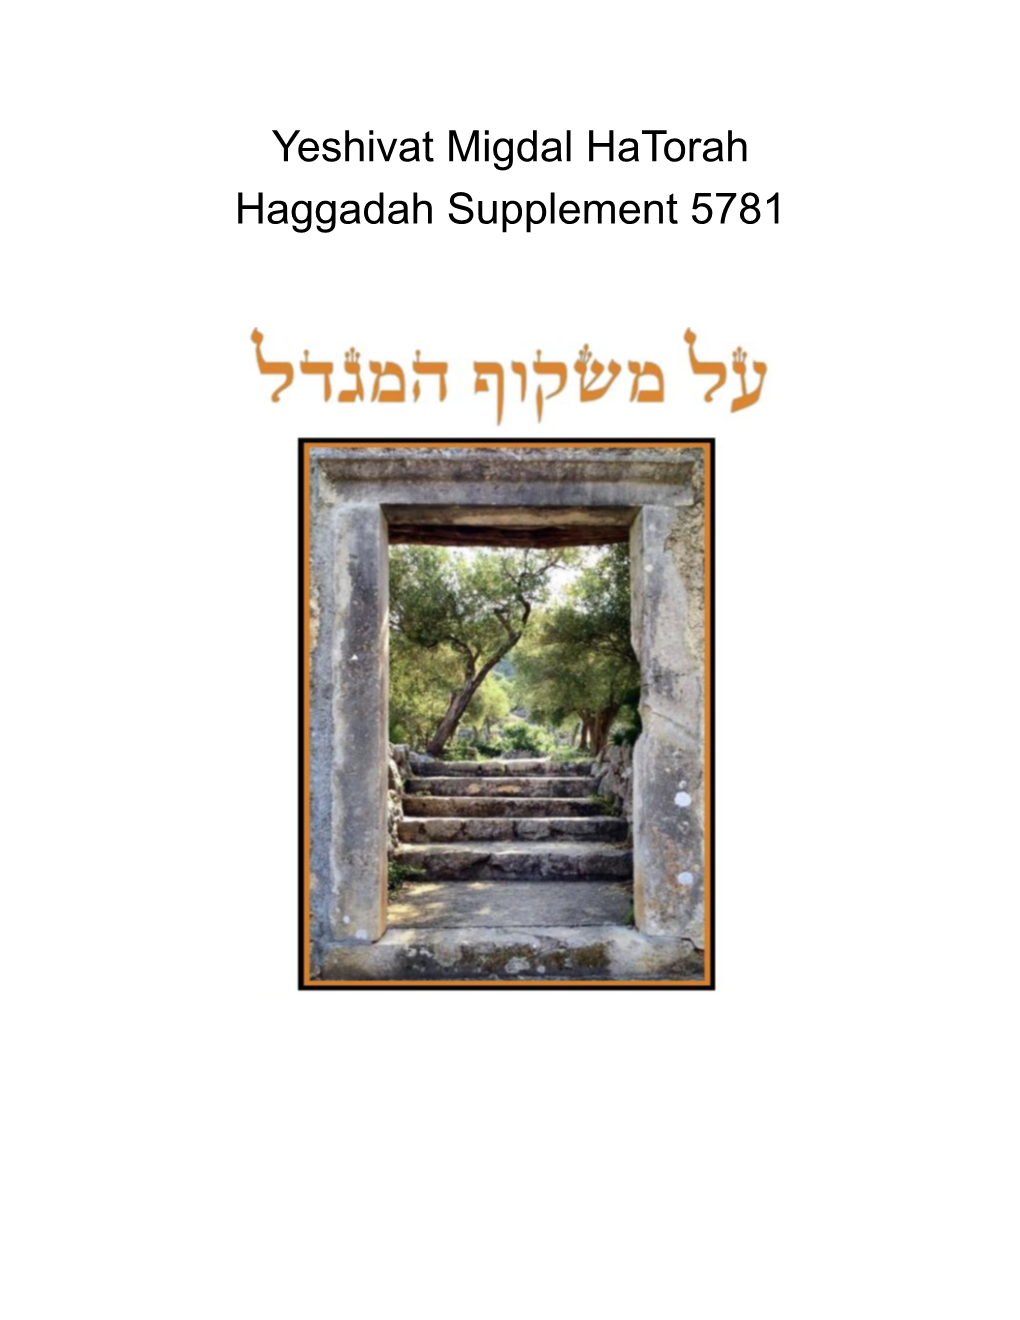 Haggadah Supplement 5781 This Year’S Edition Is Sponsored By